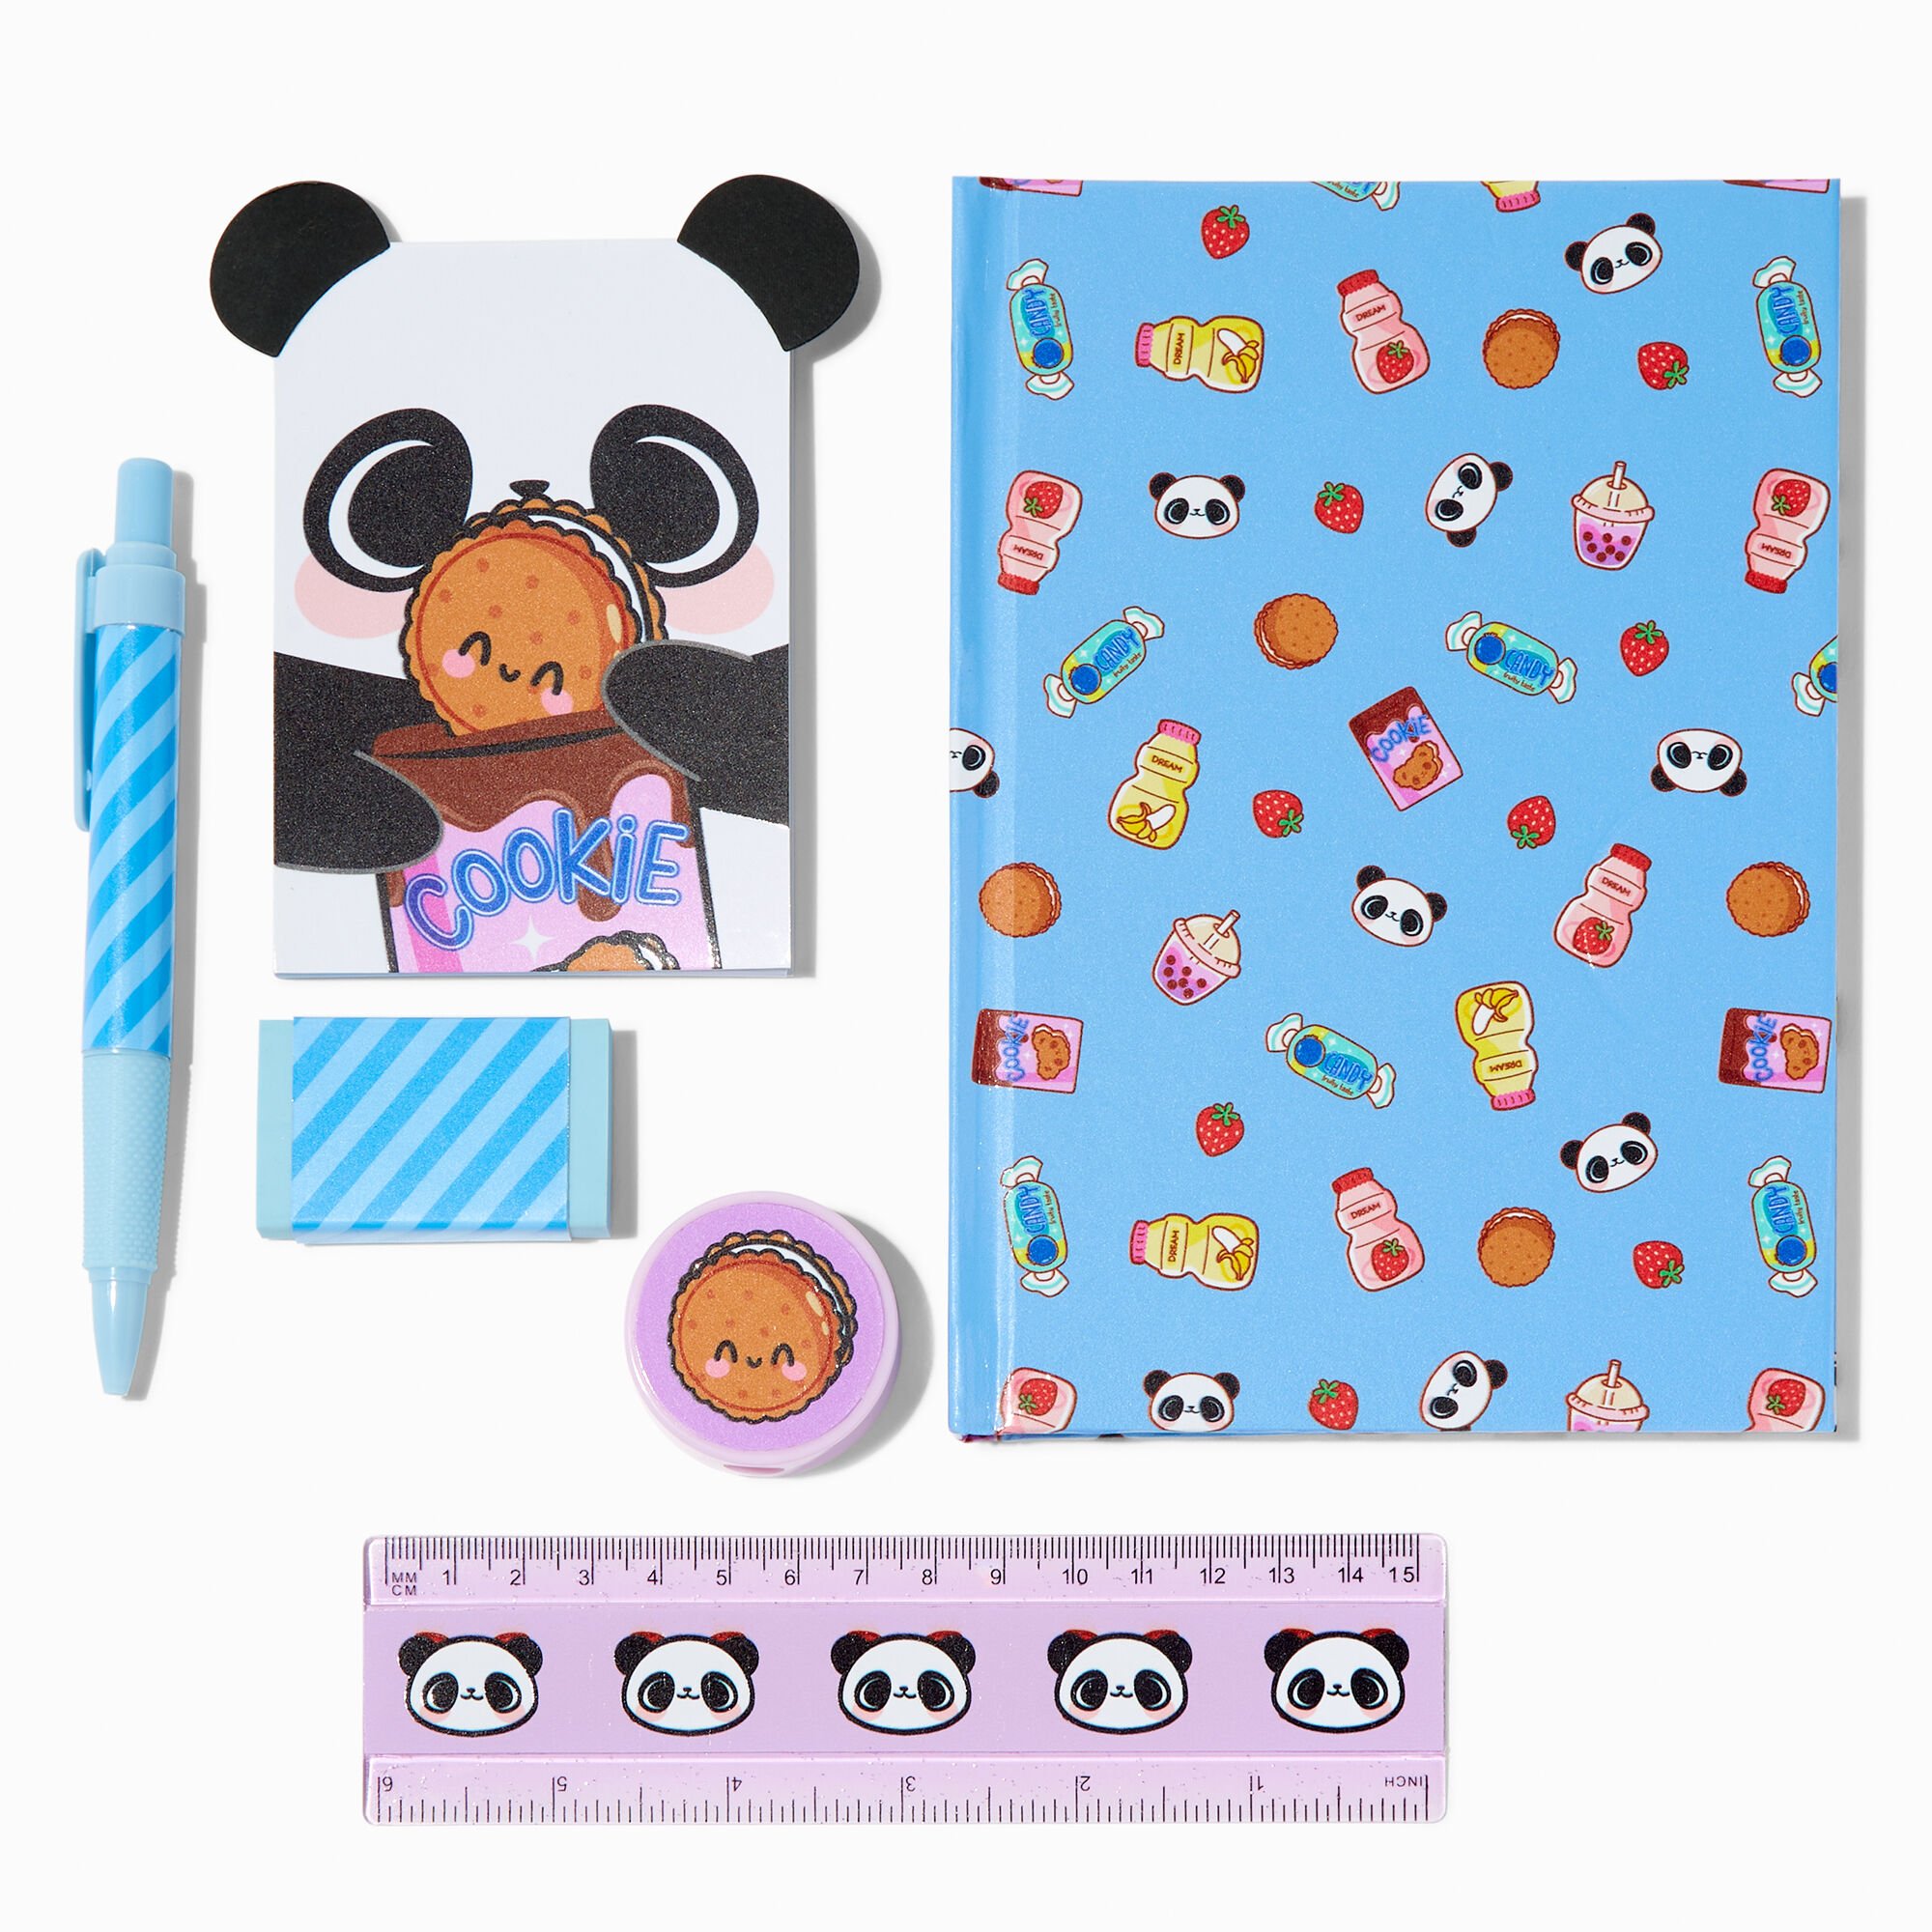 View Claires Panda Cookie Stationery Set information